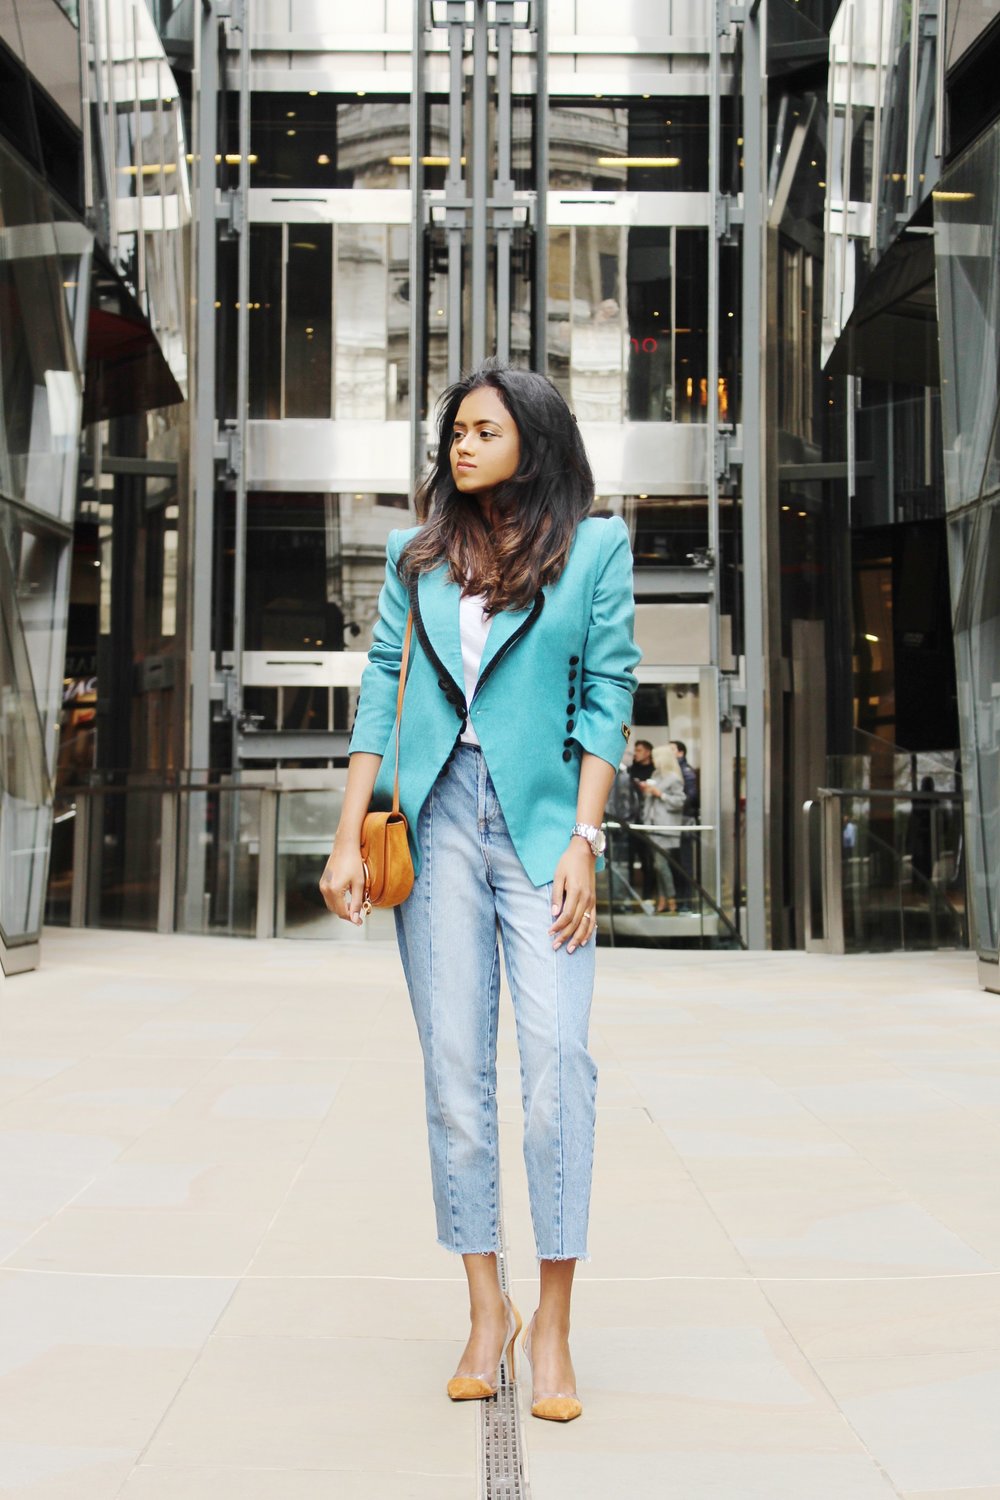 Sachini standing Sachini standing in a shopping street wearing a light blue Fendi vintage blazer, blue jeans and brown Gianvito Rossi heels with a brown handbagin a shopping street wearing a light blue Fendi blazer, blue jeans and brown Gianvito Rossi heels with a brown handbag